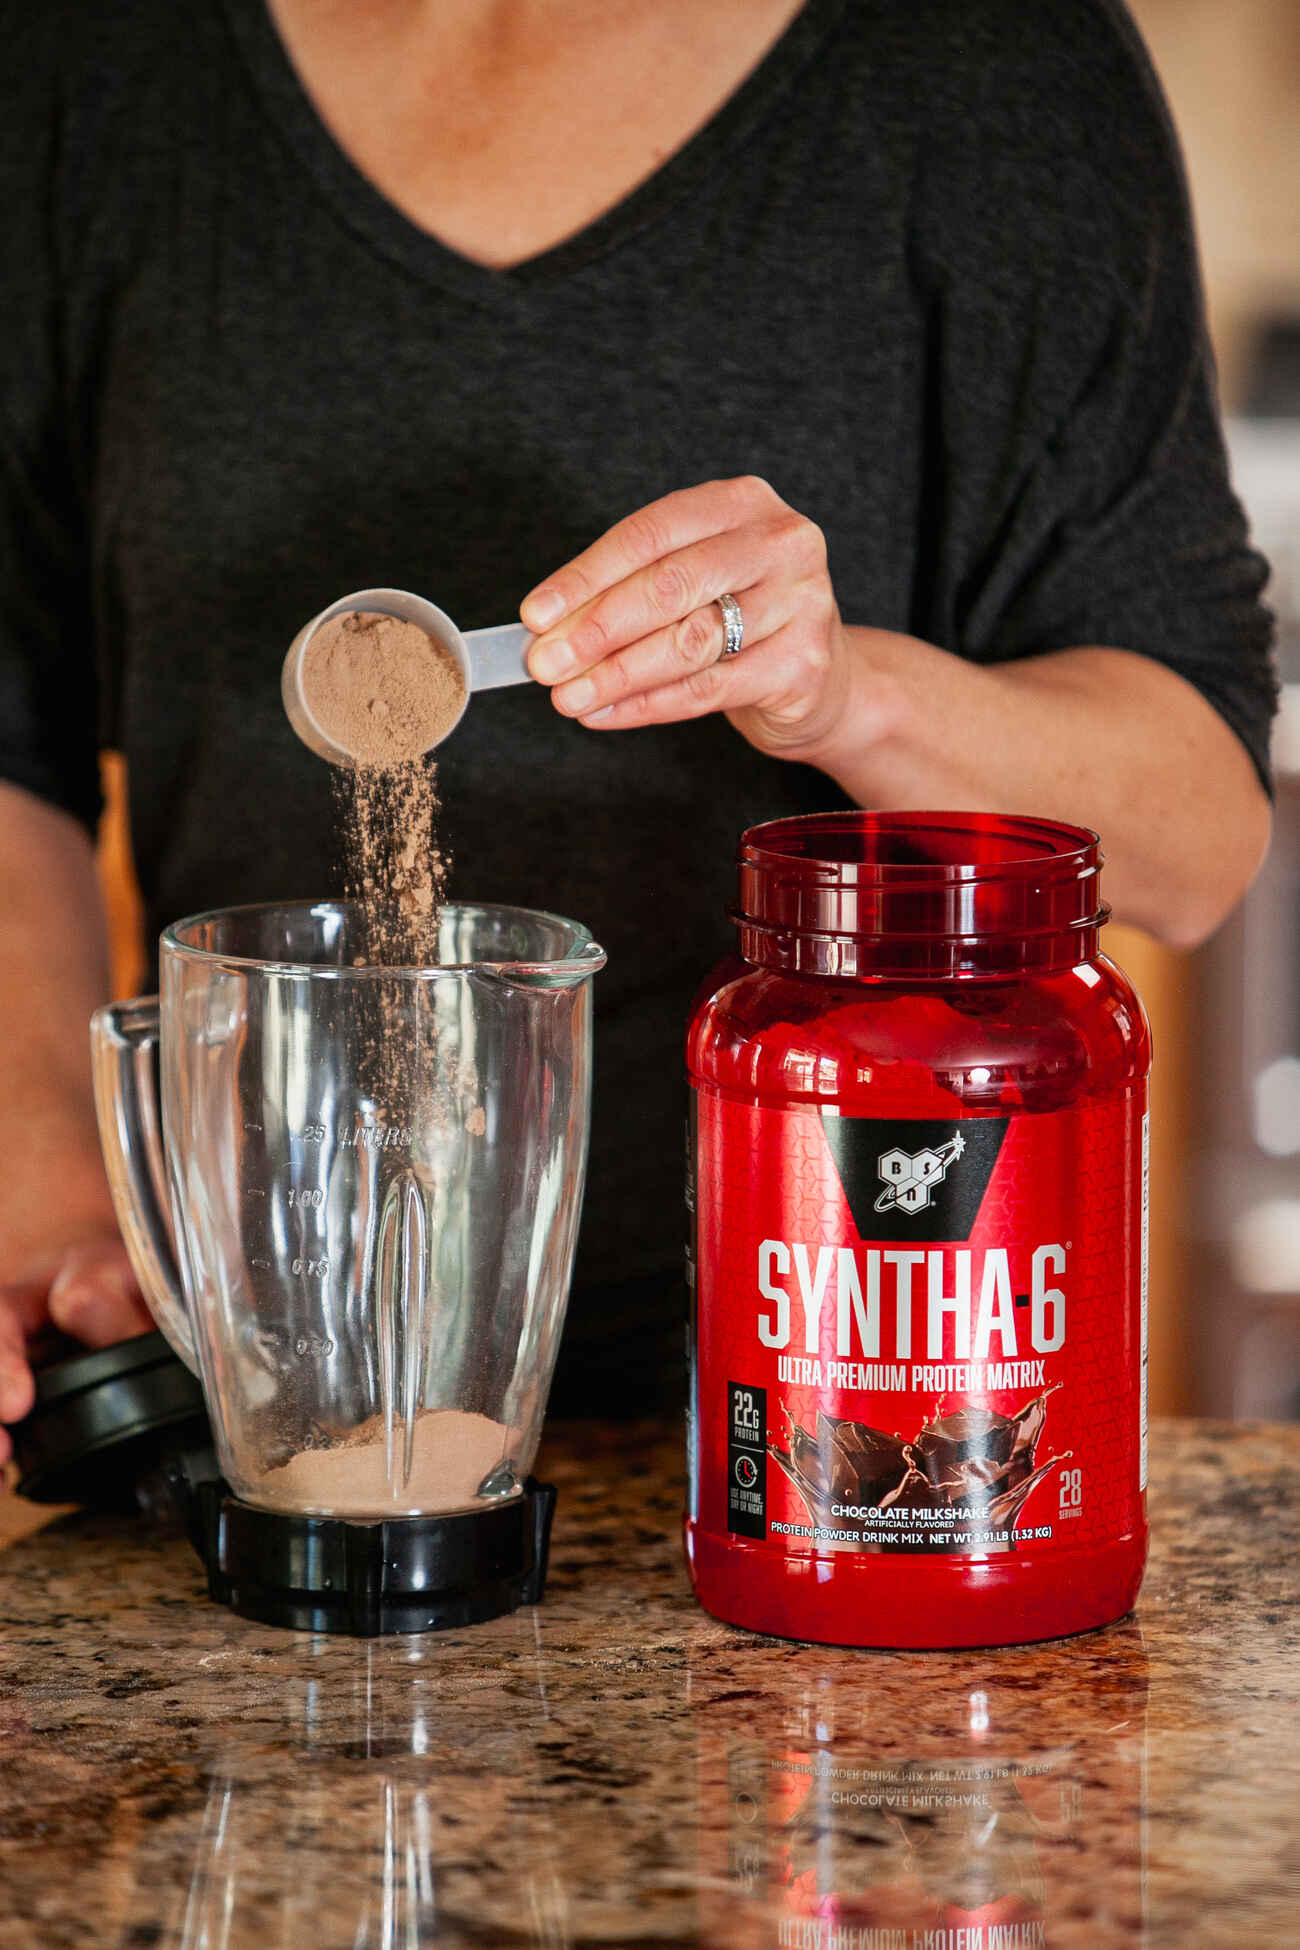 A person wearing a black top is pouring chocolate-colored Syntha-6 protein powder into a blender, with a red container of the protein powder visible on a kitchen counter